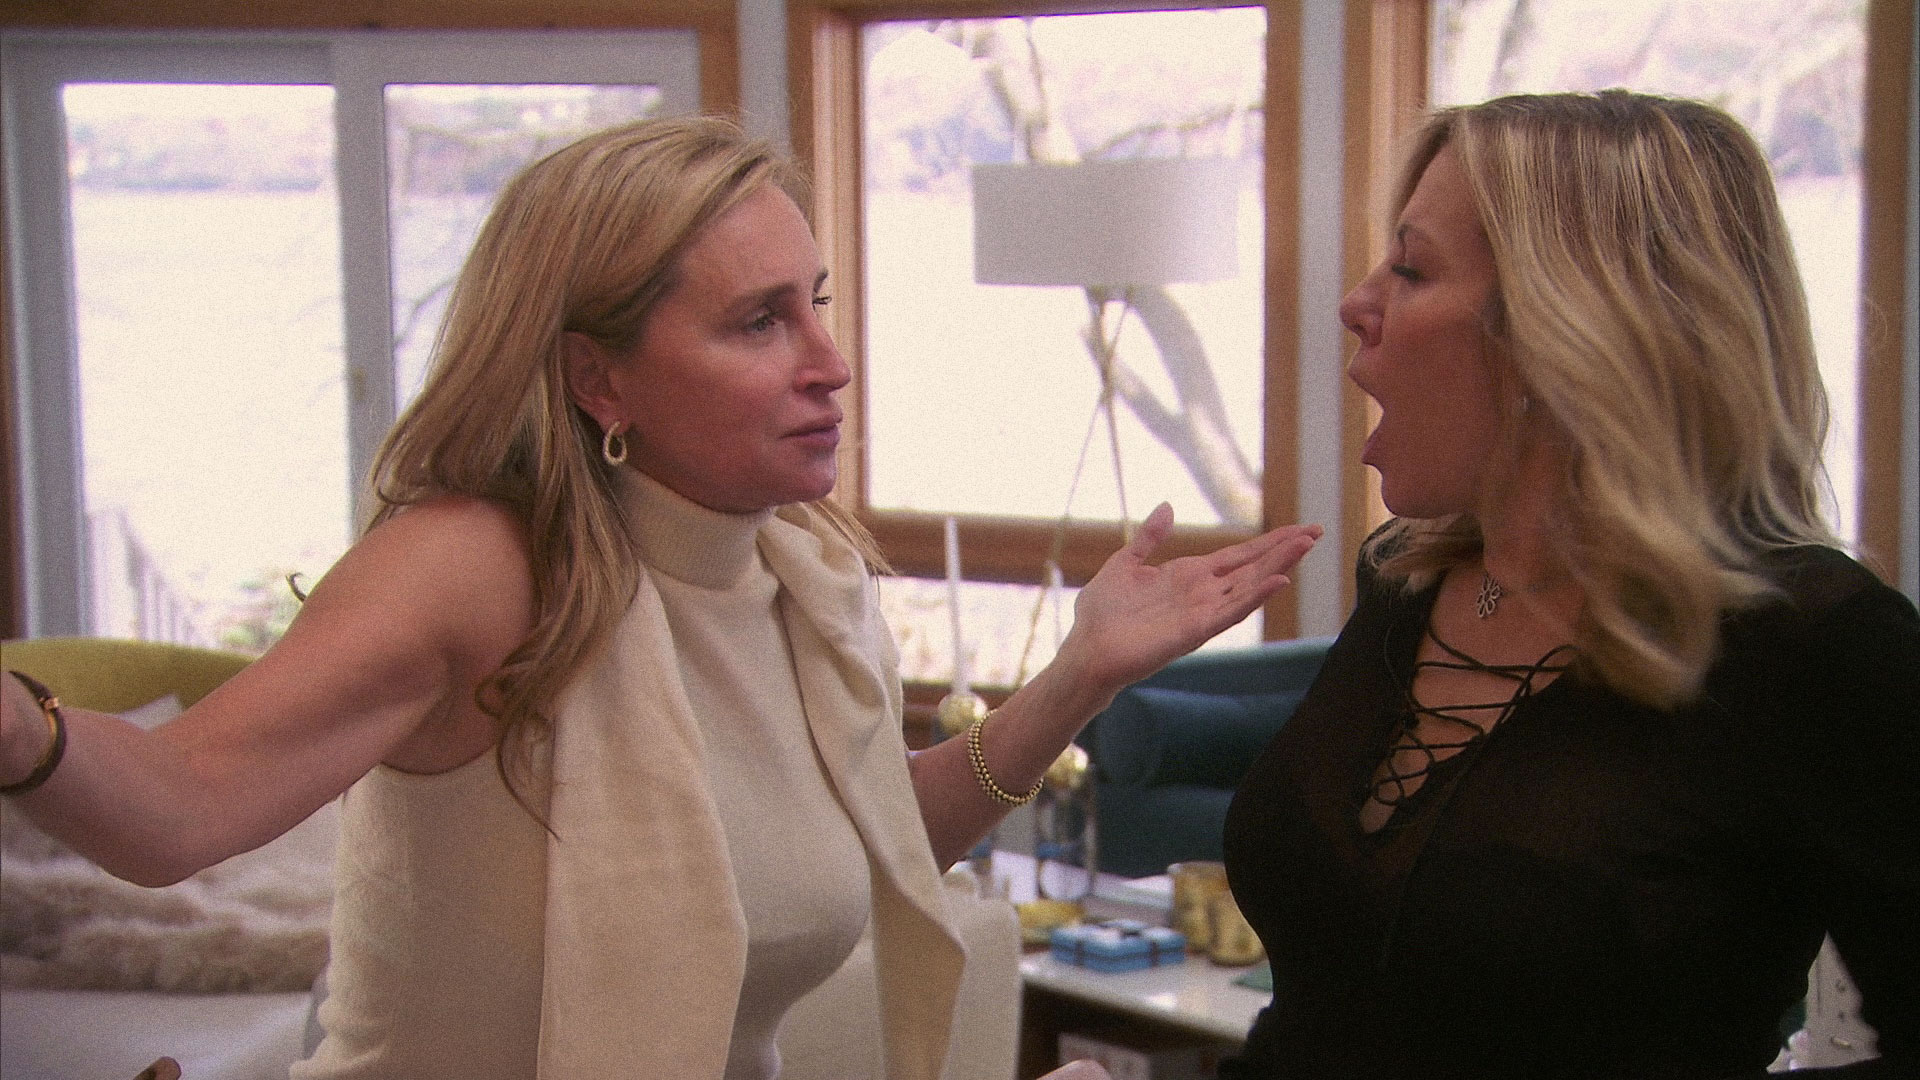 RHONY The Real Housewives of New York City S11E11 saison 11 épisode 11 Upstate Girls